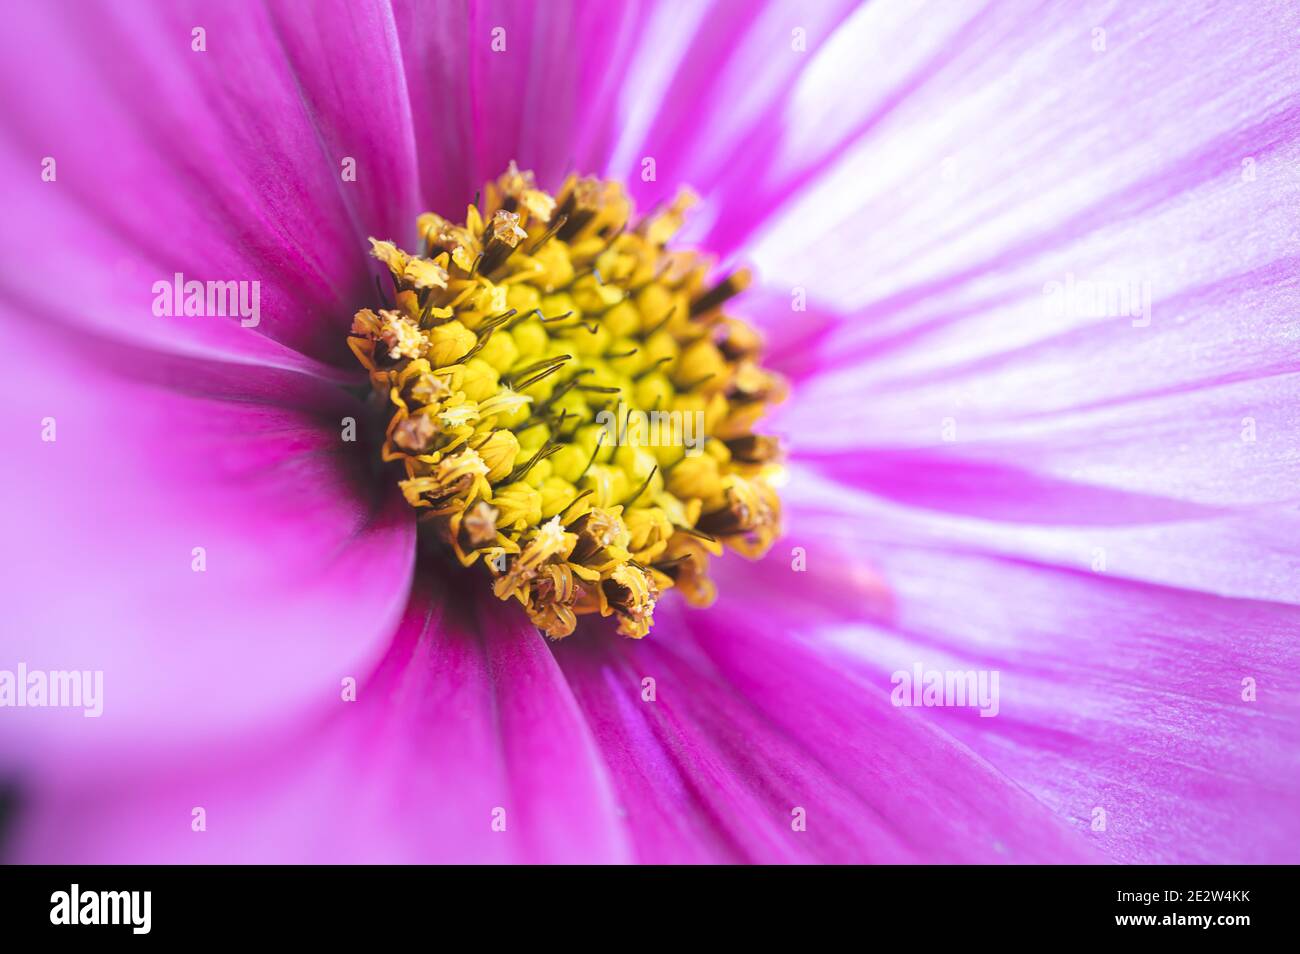 Close-up of pink flower with yellow stamens a natural beautiful background, selective focus Stock Photo